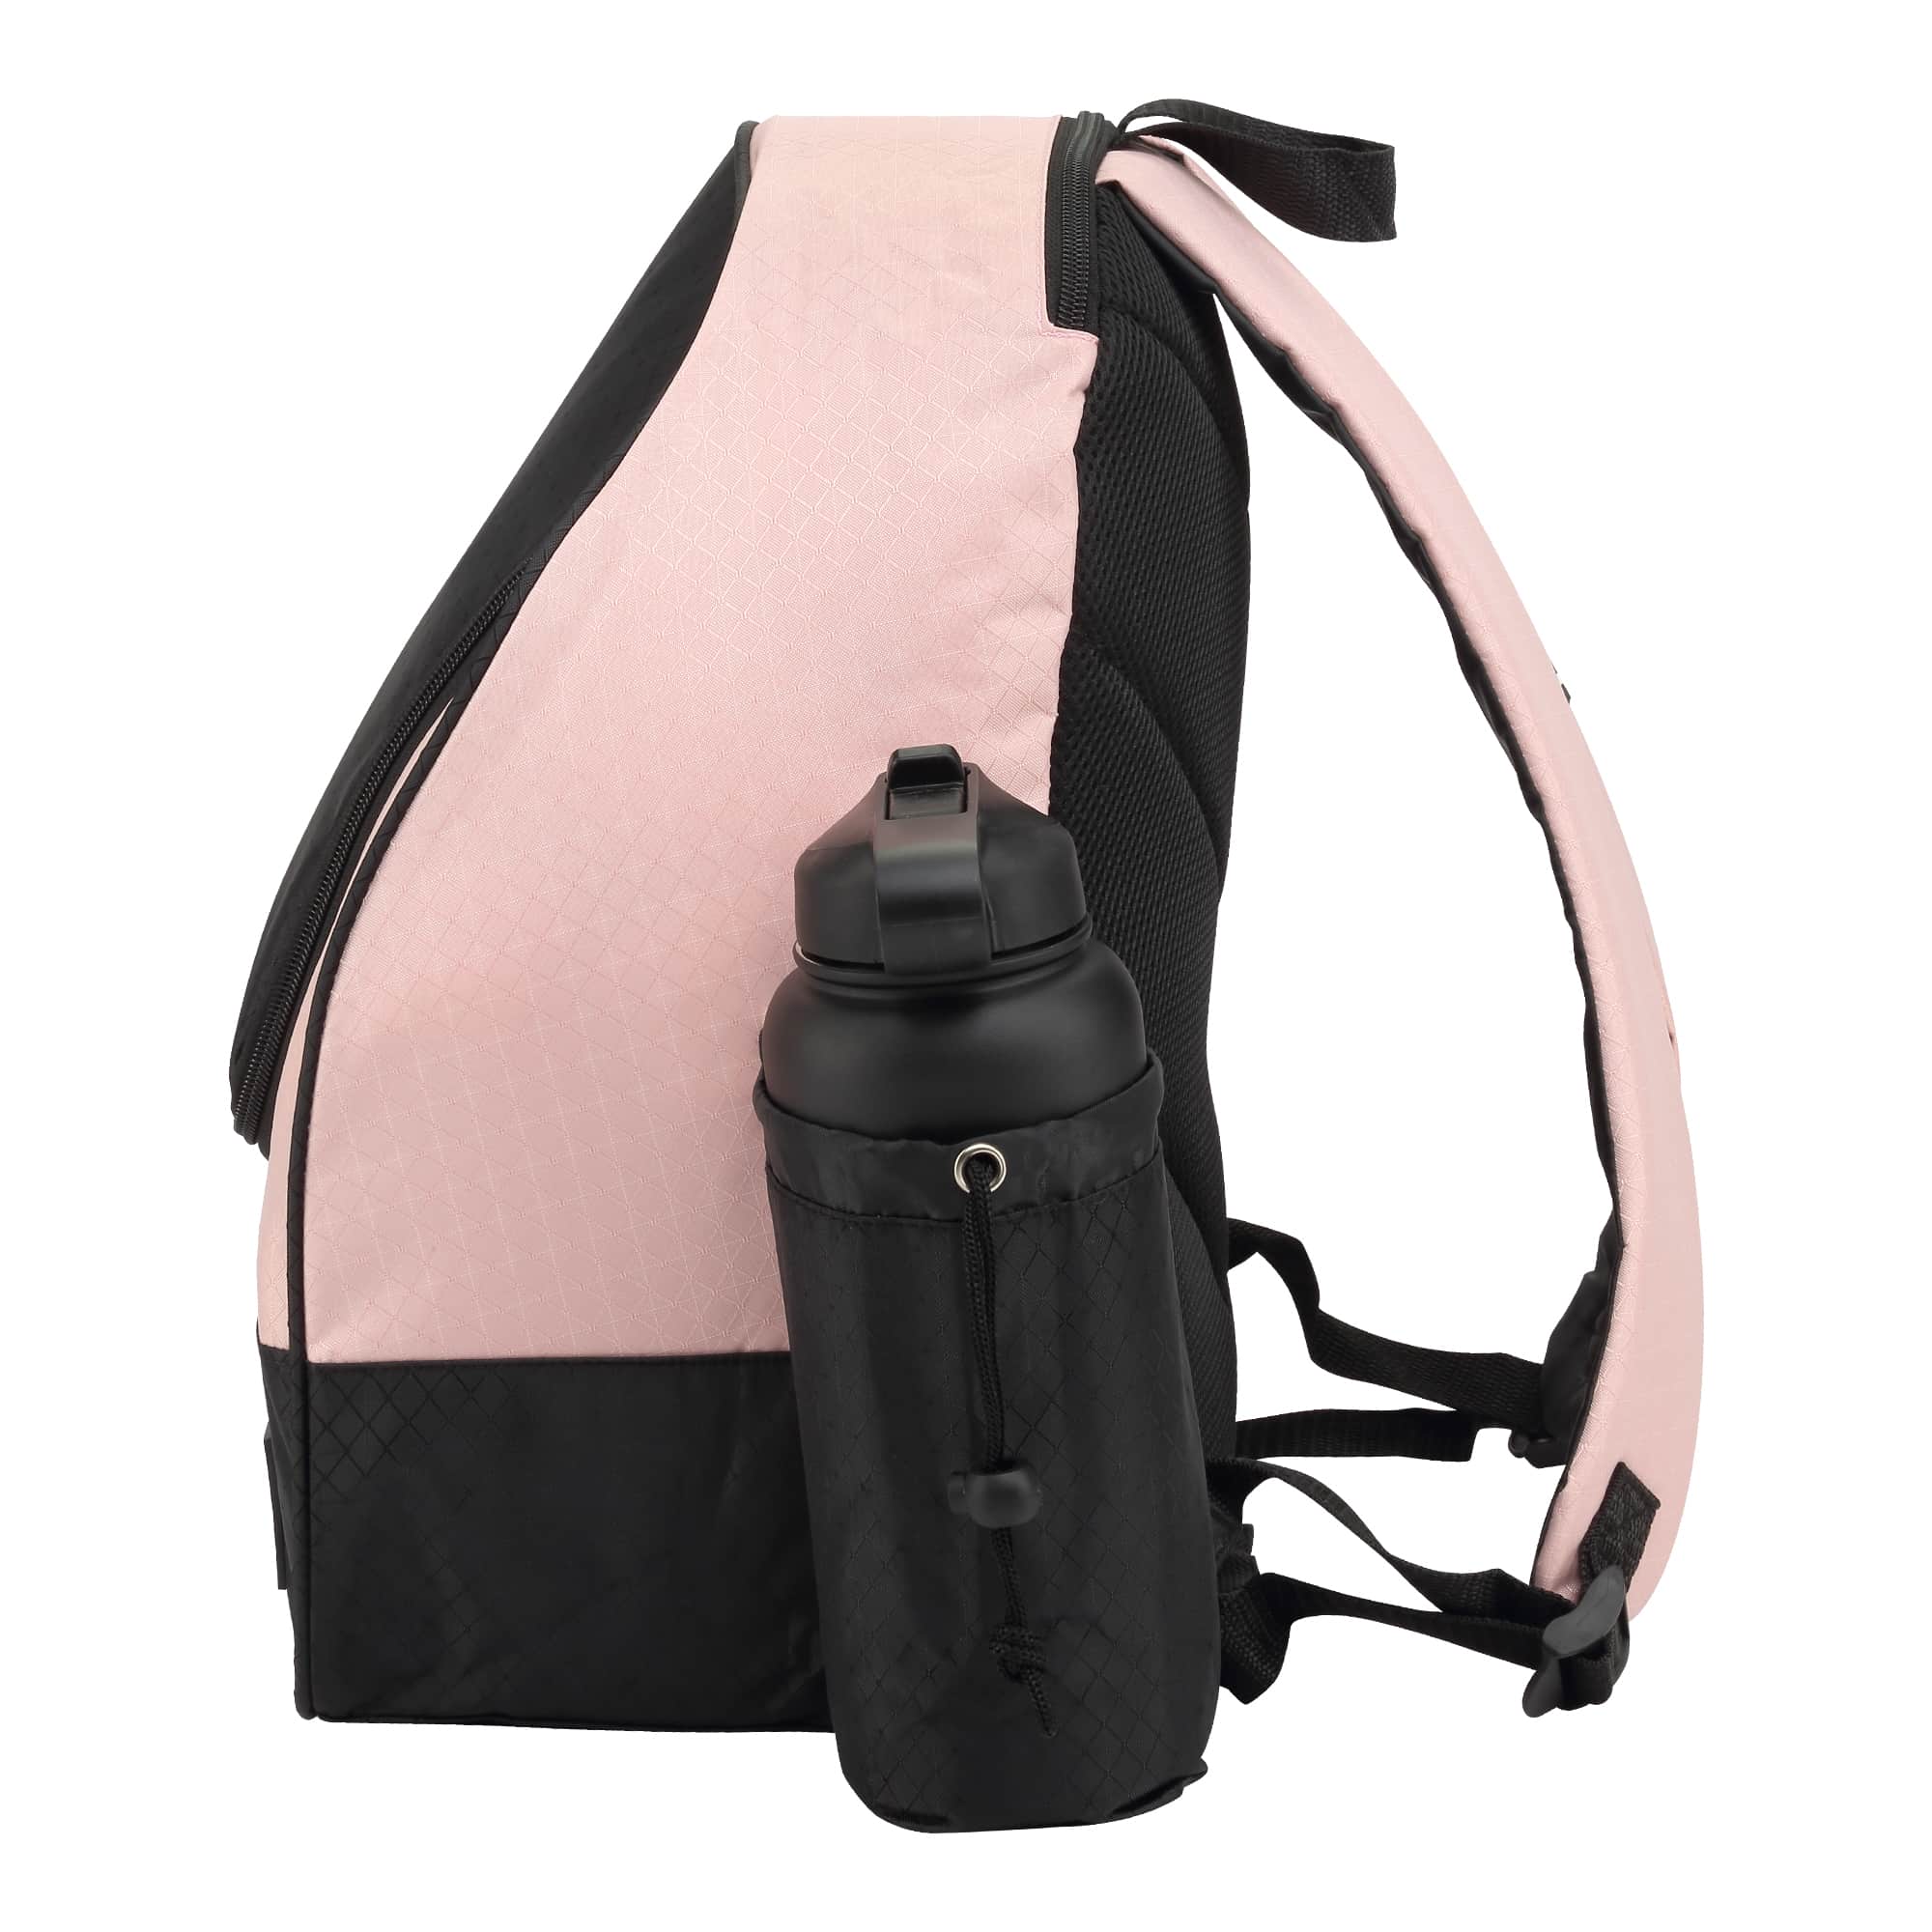 Prodigy BP-4 Backpack - Pink